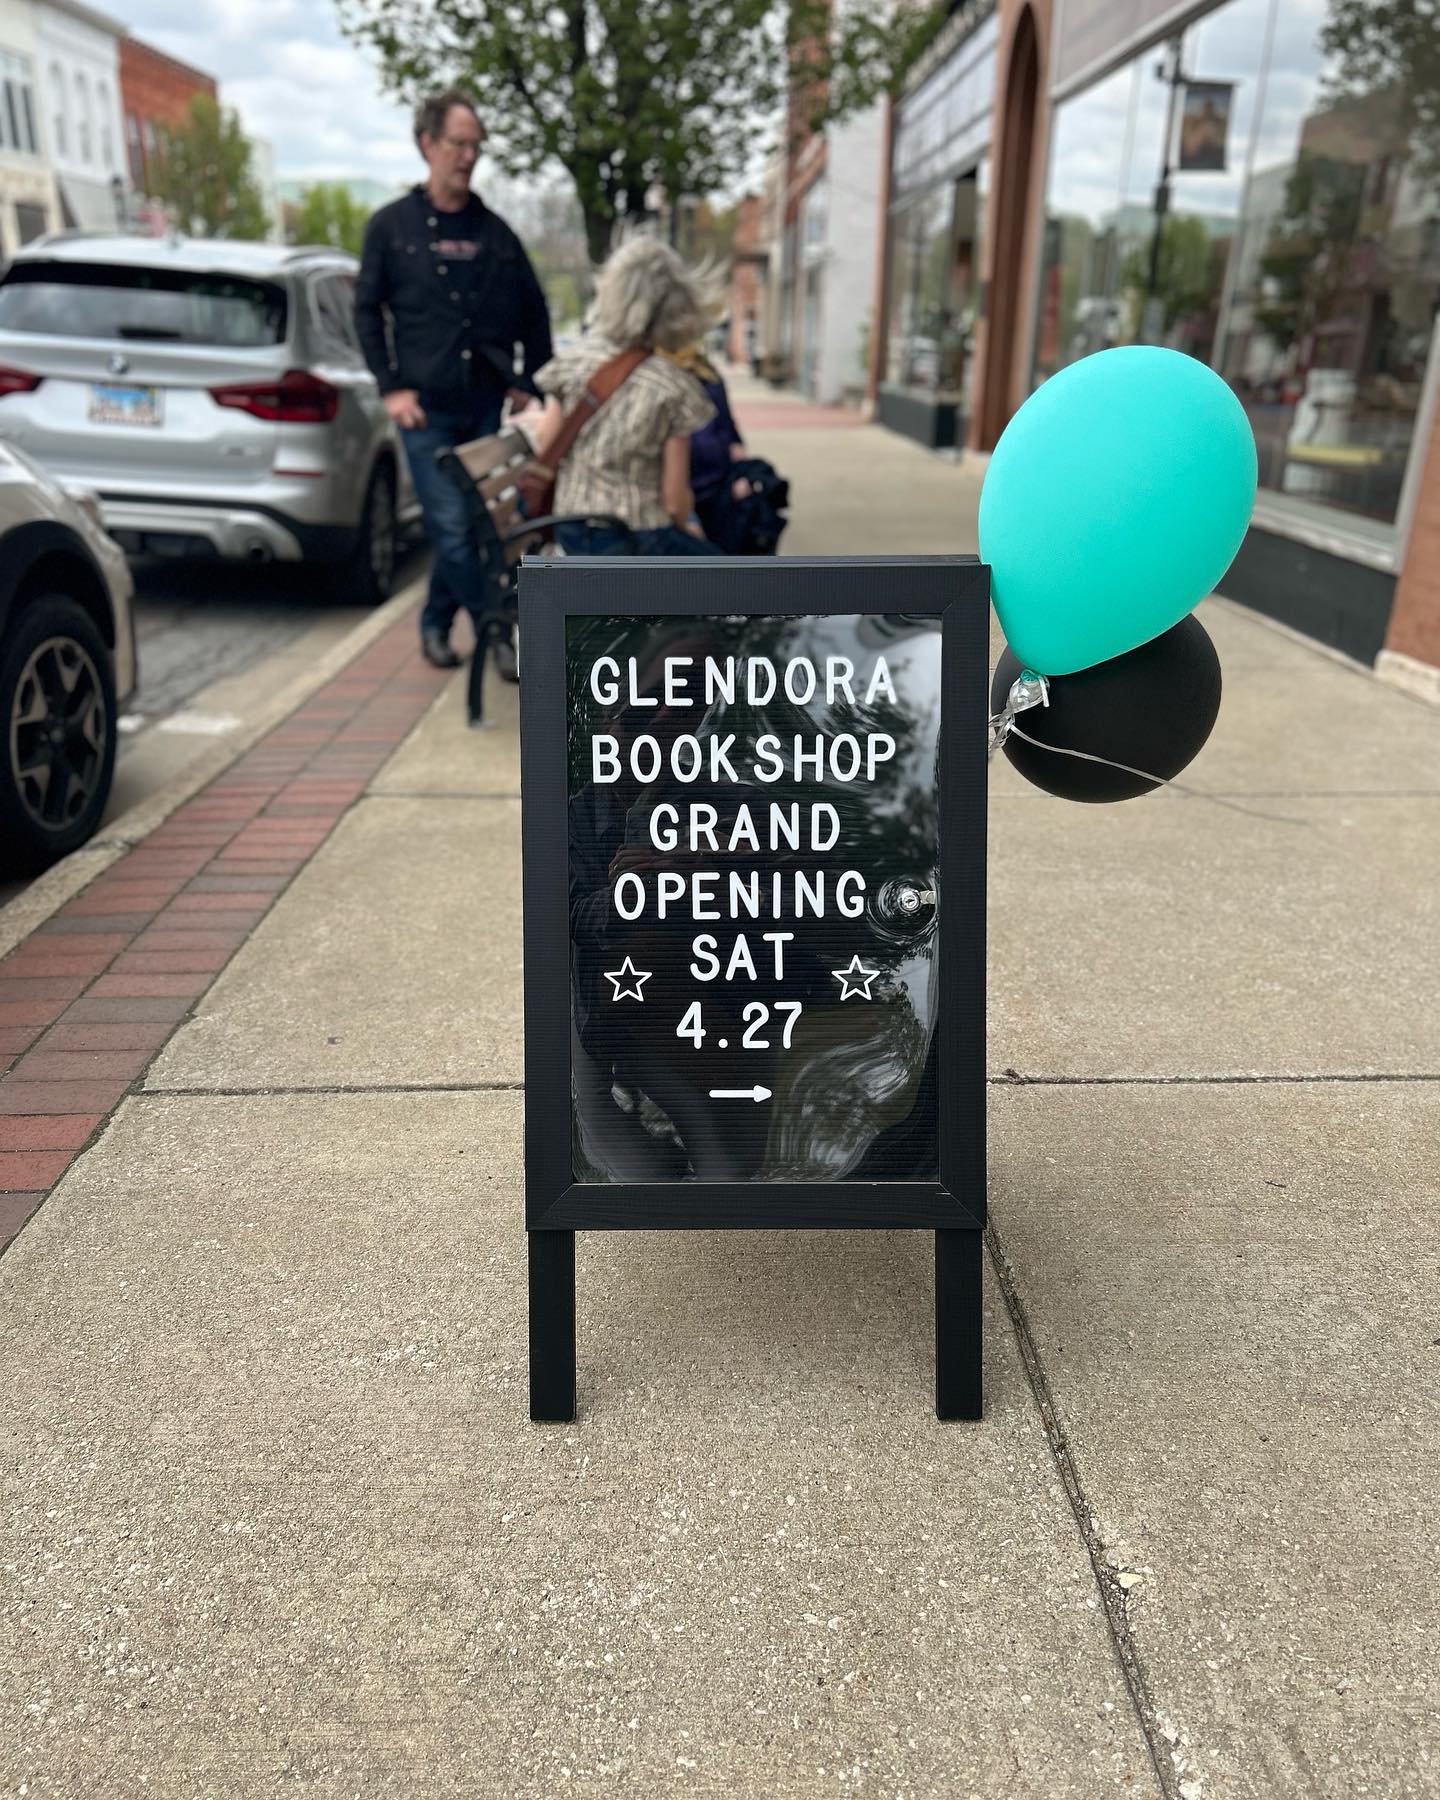 What fun we had last Saturday at our Grand Opening on Independent Bookstore Day! We want to thank each and every person who came out and supported us last weekend - it was truly a whirlwind! Stay tuned as we plan more fun events in the future. Rememb